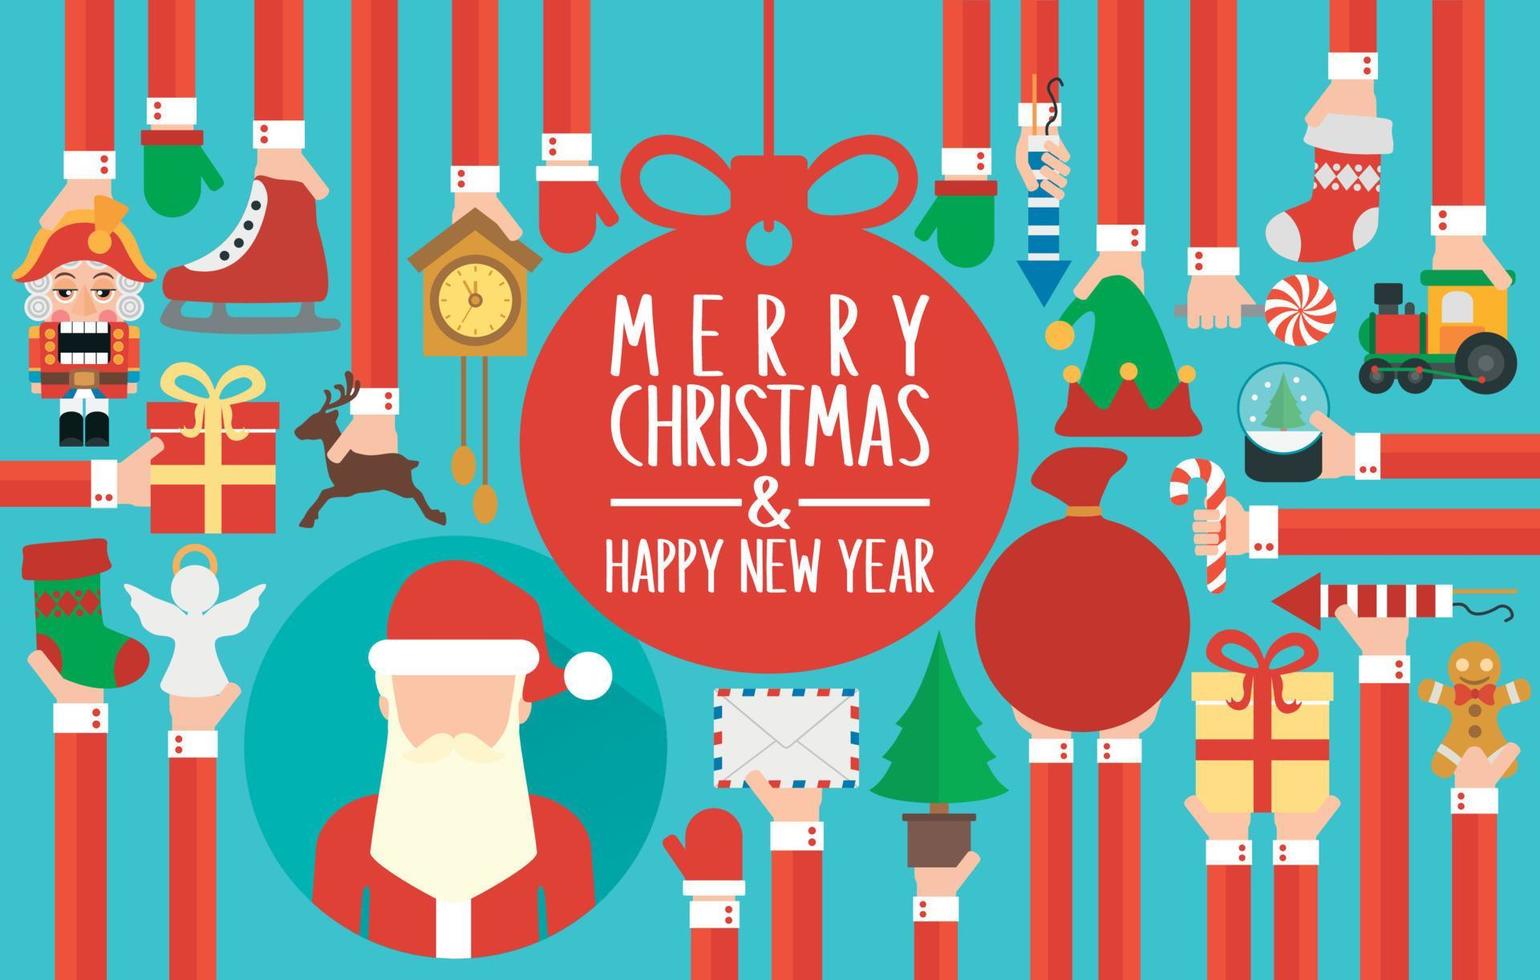 Merry Christmas and Happy New Year greatings concept modern design flat with Santa Claus. Vector illustration